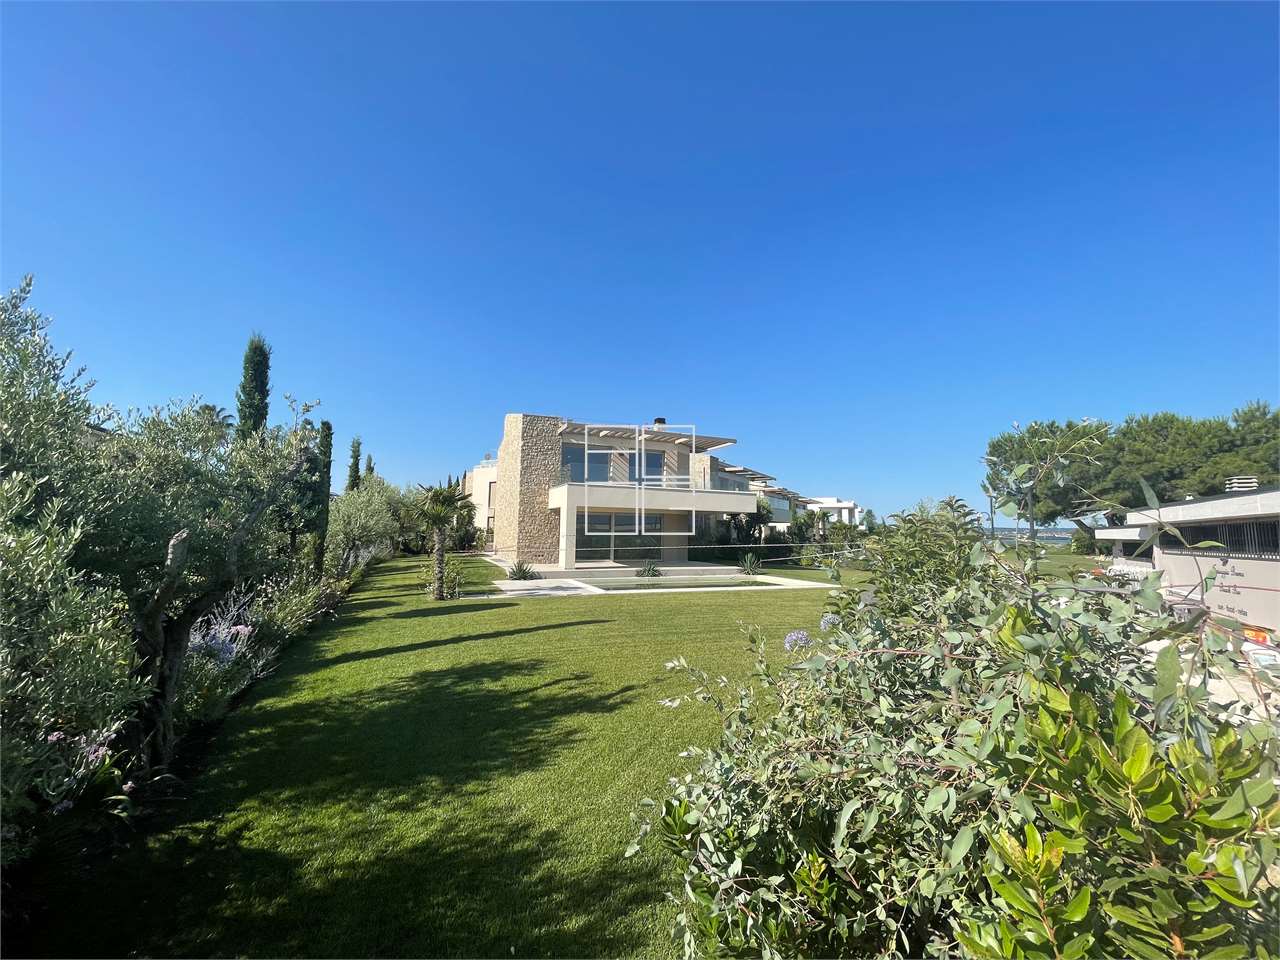 Important villa overlooking the lake in Sirmione